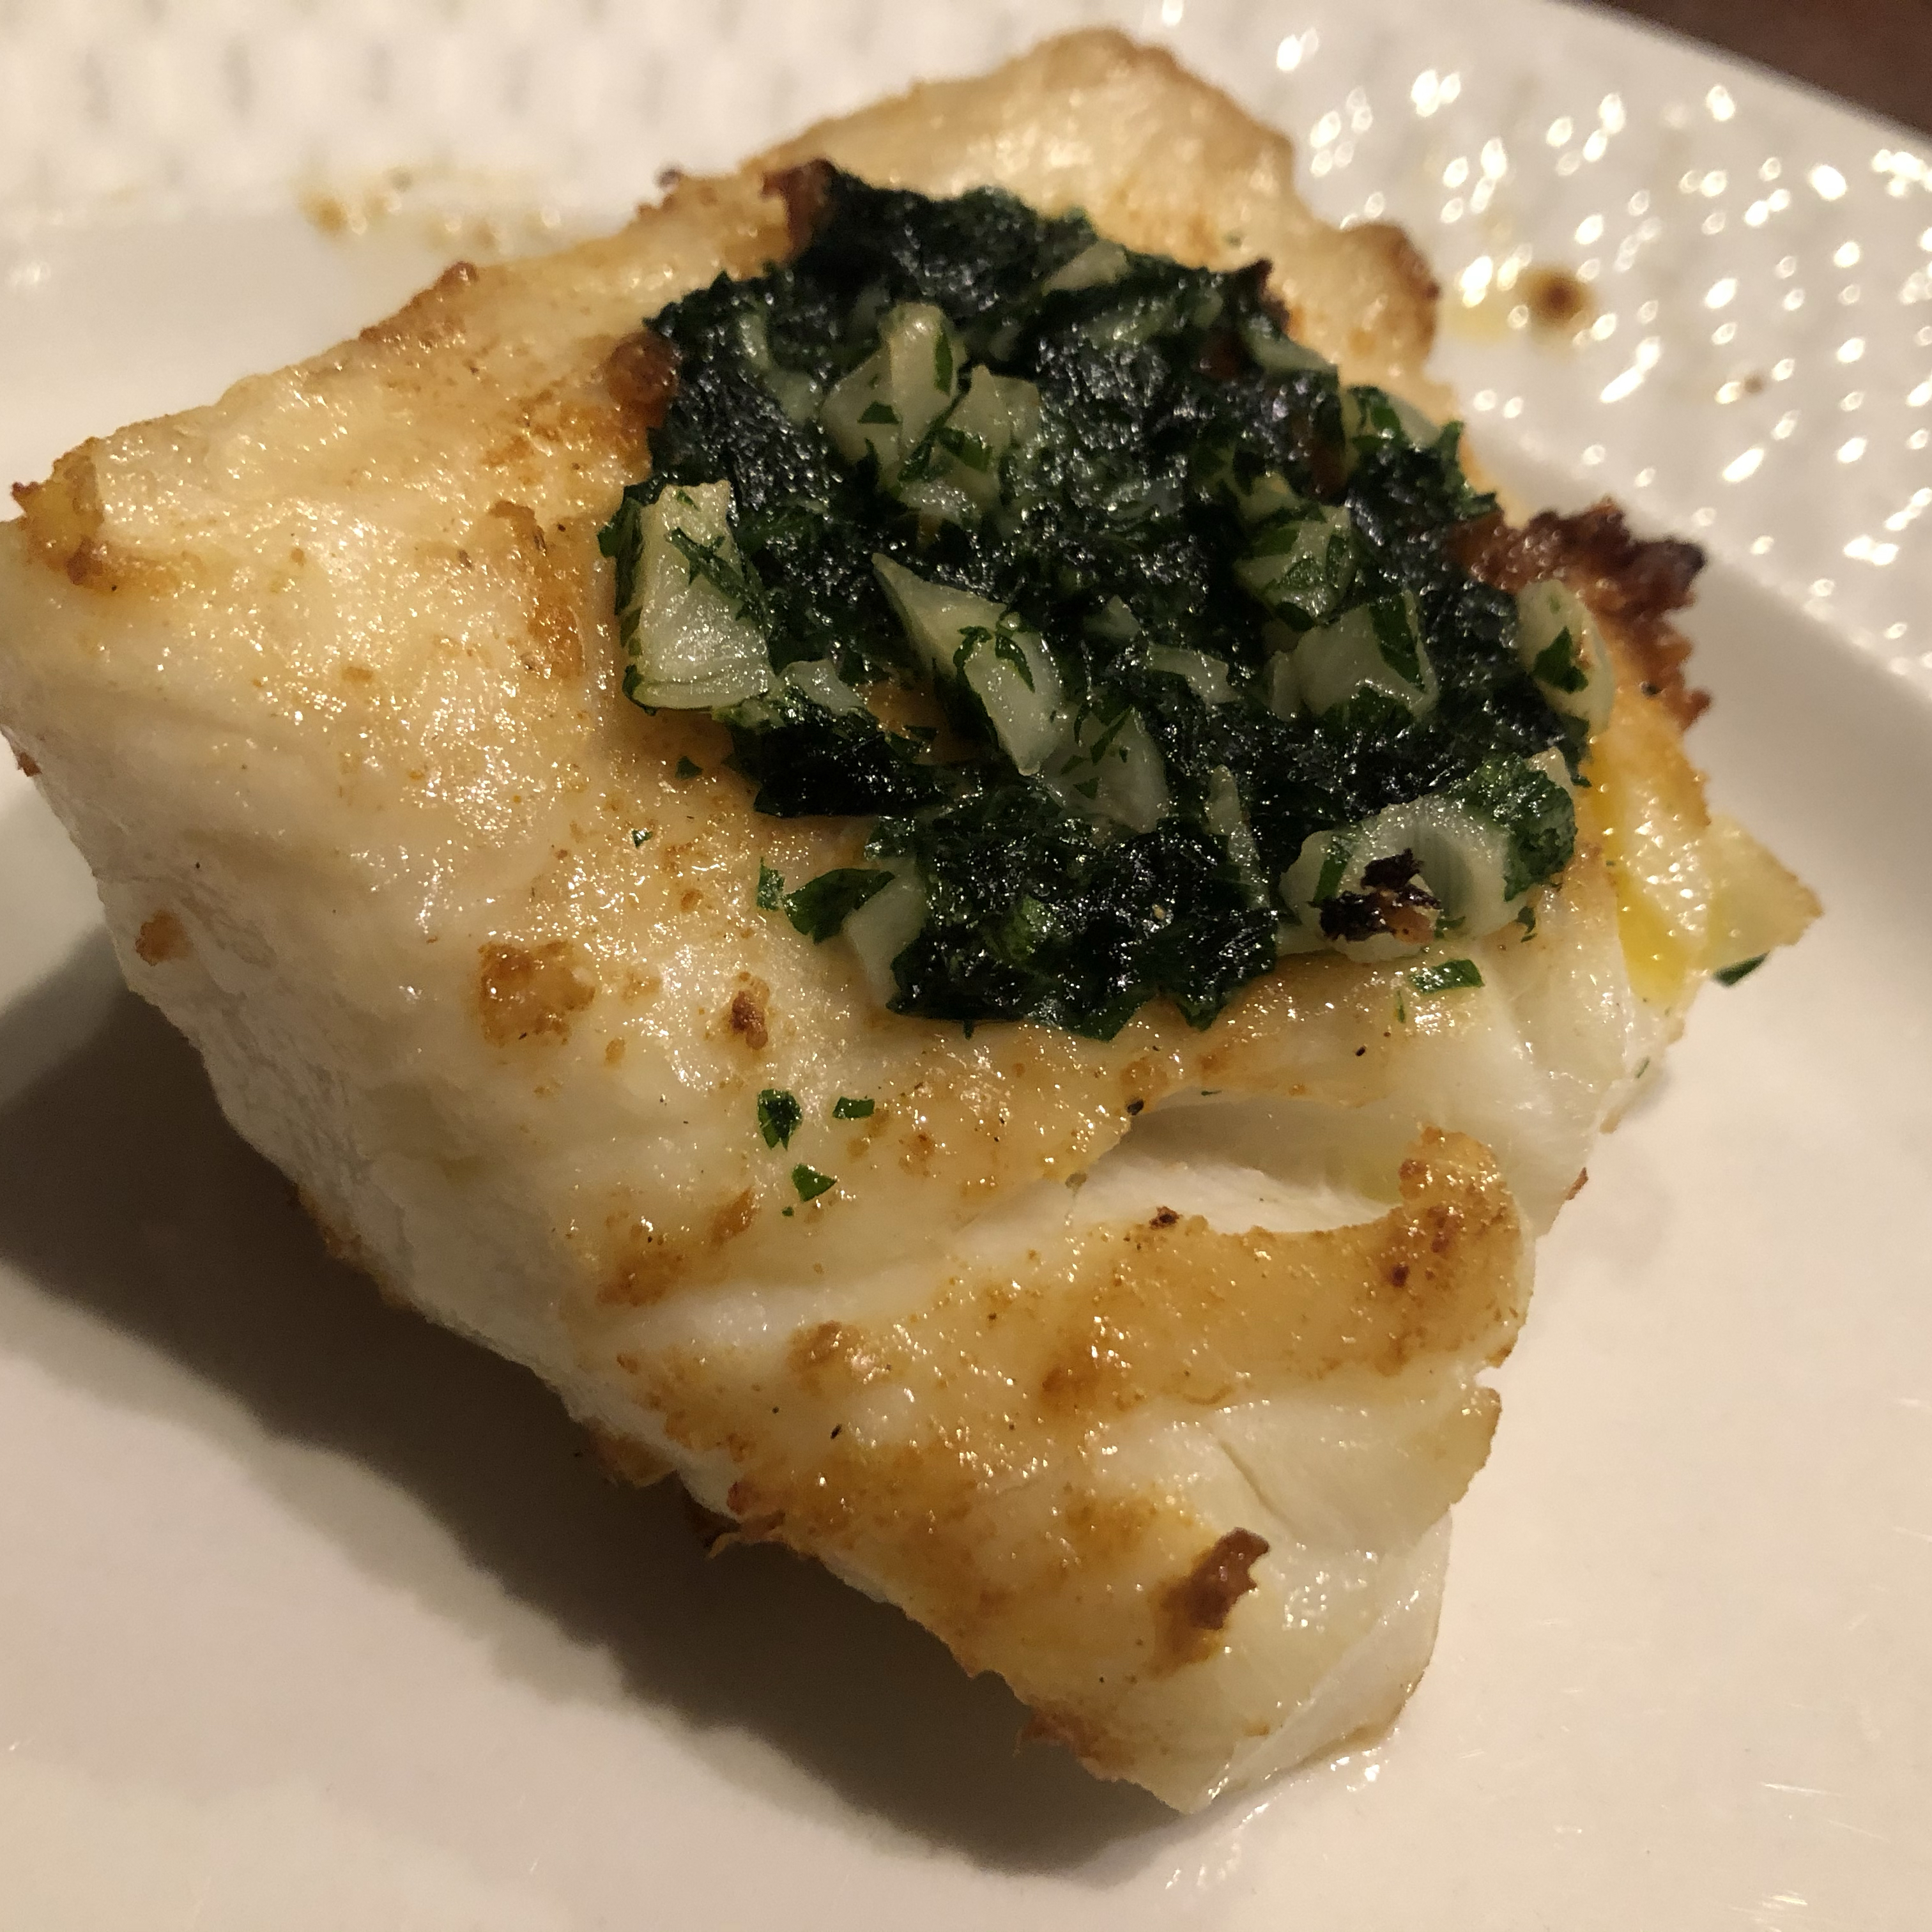 <p>Simple yet packed with flavor, this recipe lets the sea bass shine. The fillets are grilled with a paprika and lemon pepper seasoning, then drizzled with garlic and parsley butter. "This was great&mdash;a restaurant quality dish," says reviewer Claudette P Henry.</p>
                          